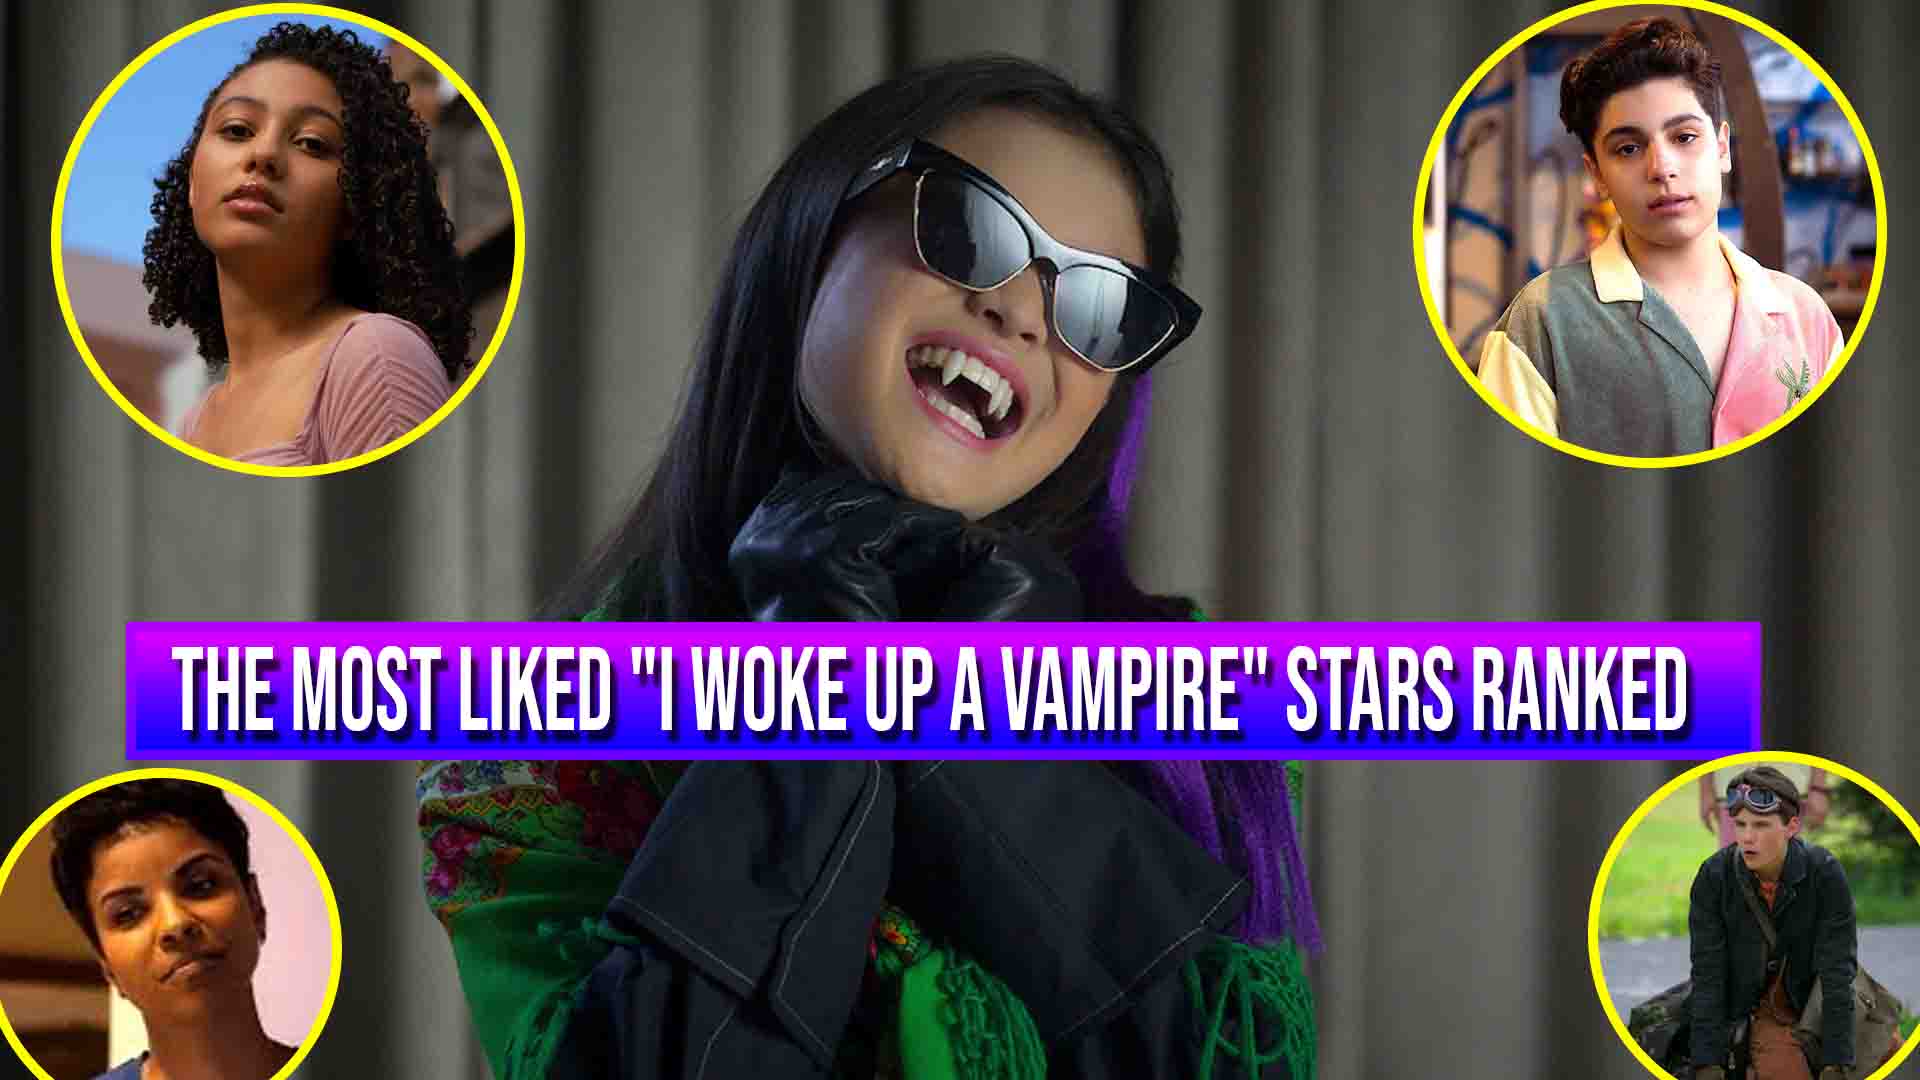 The Most Liked “I Woke Up a Vampire” Stars Ranked From Lowest